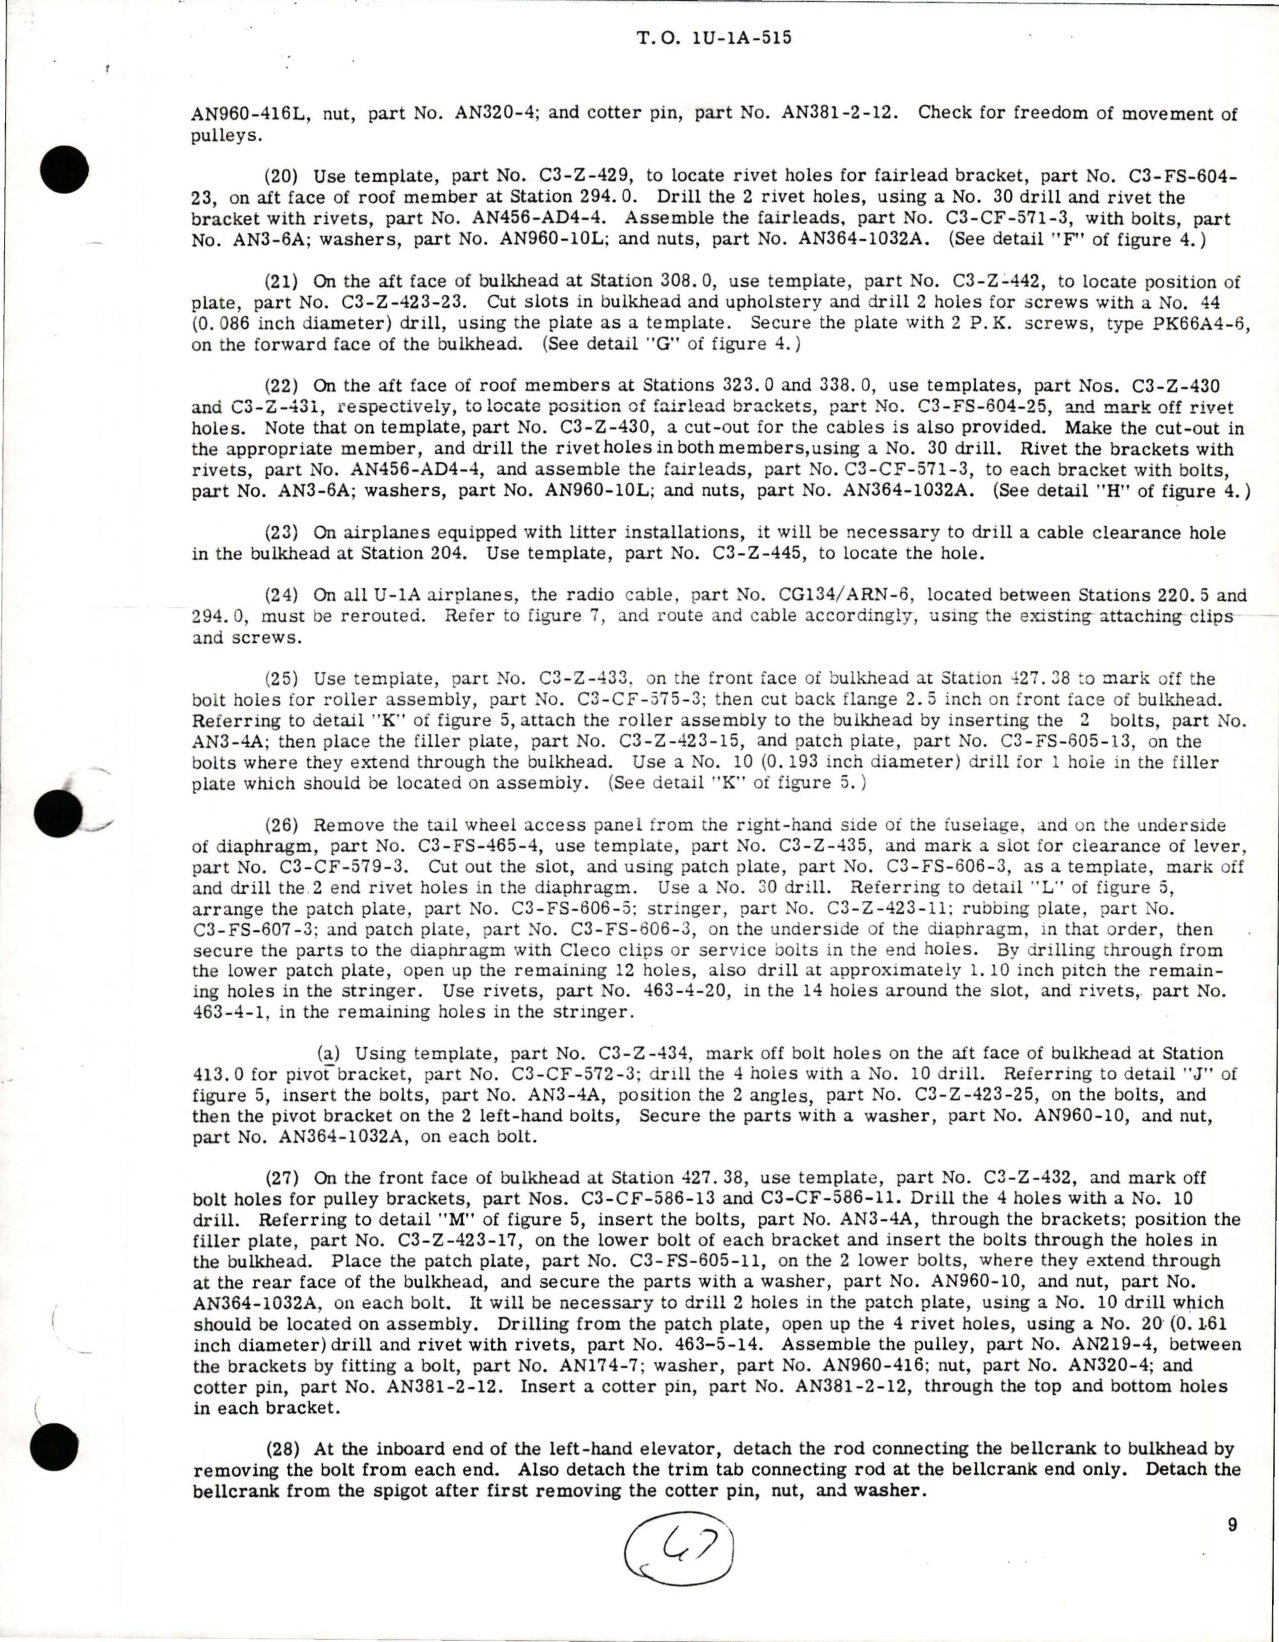 Sample page 9 from AirCorps Library document: Installation of Flap Operated Elevator Trim Tab on YU-1 and U-1A